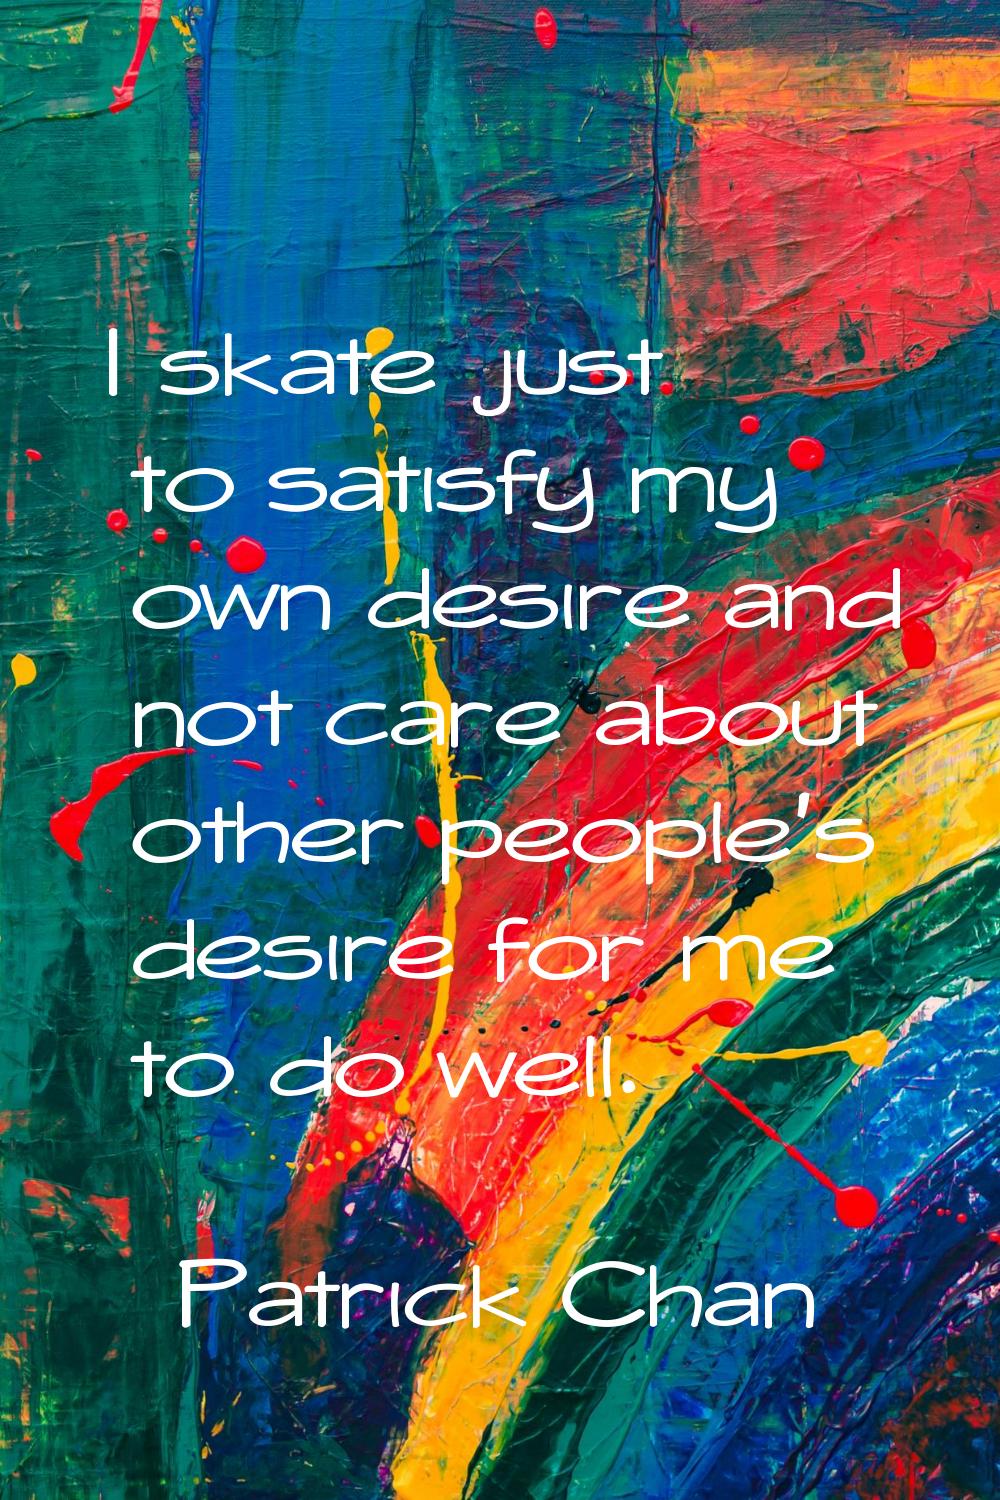 I skate just to satisfy my own desire and not care about other people's desire for me to do well.